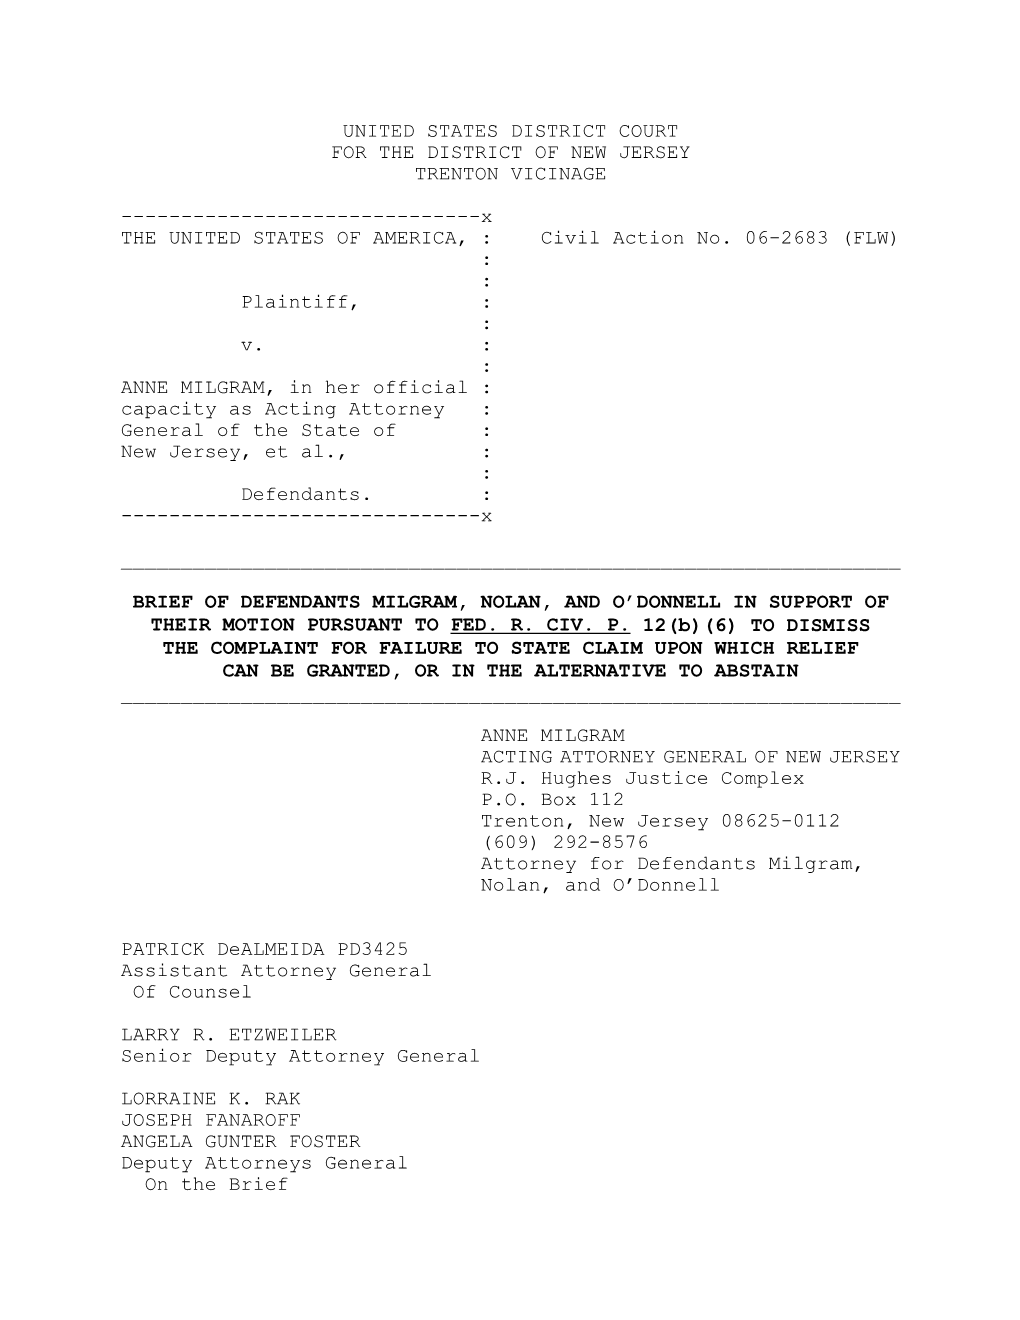 View Brief Filed with the U.S. District Court